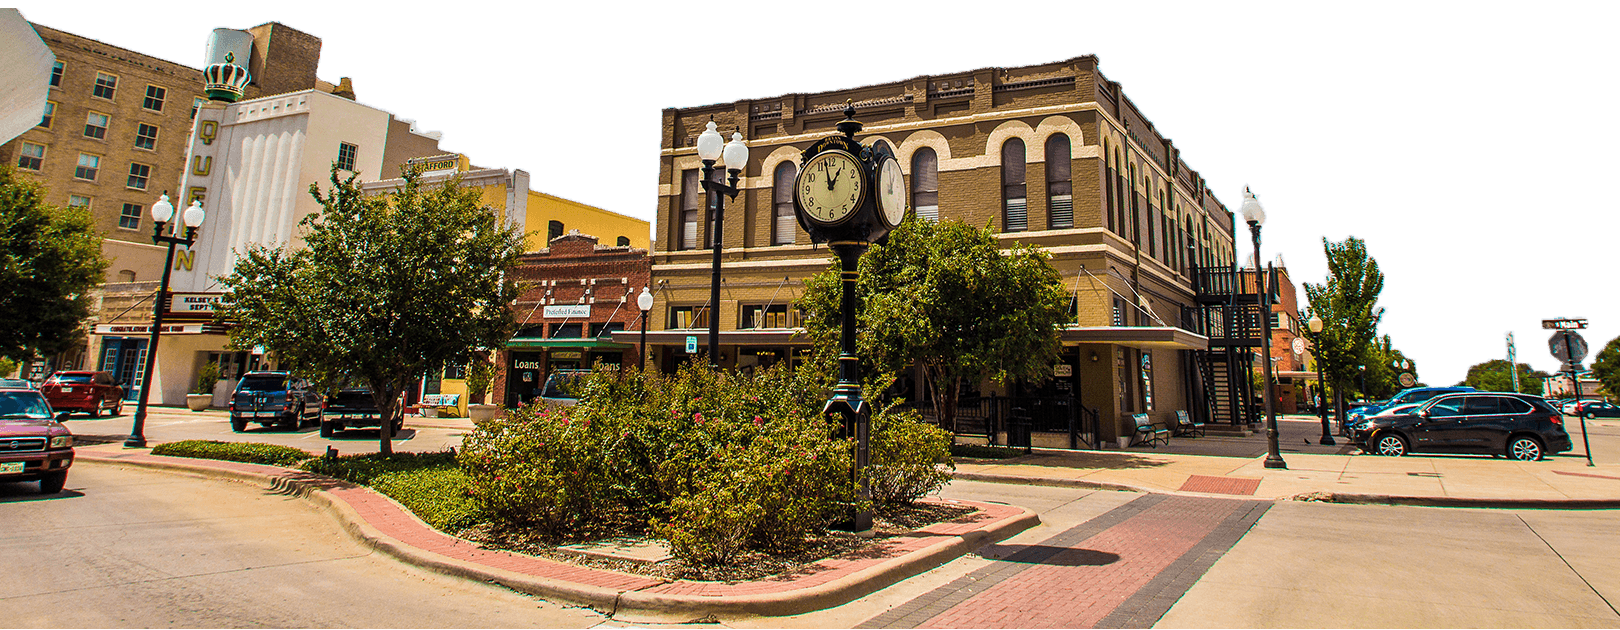 image of downtown bryan